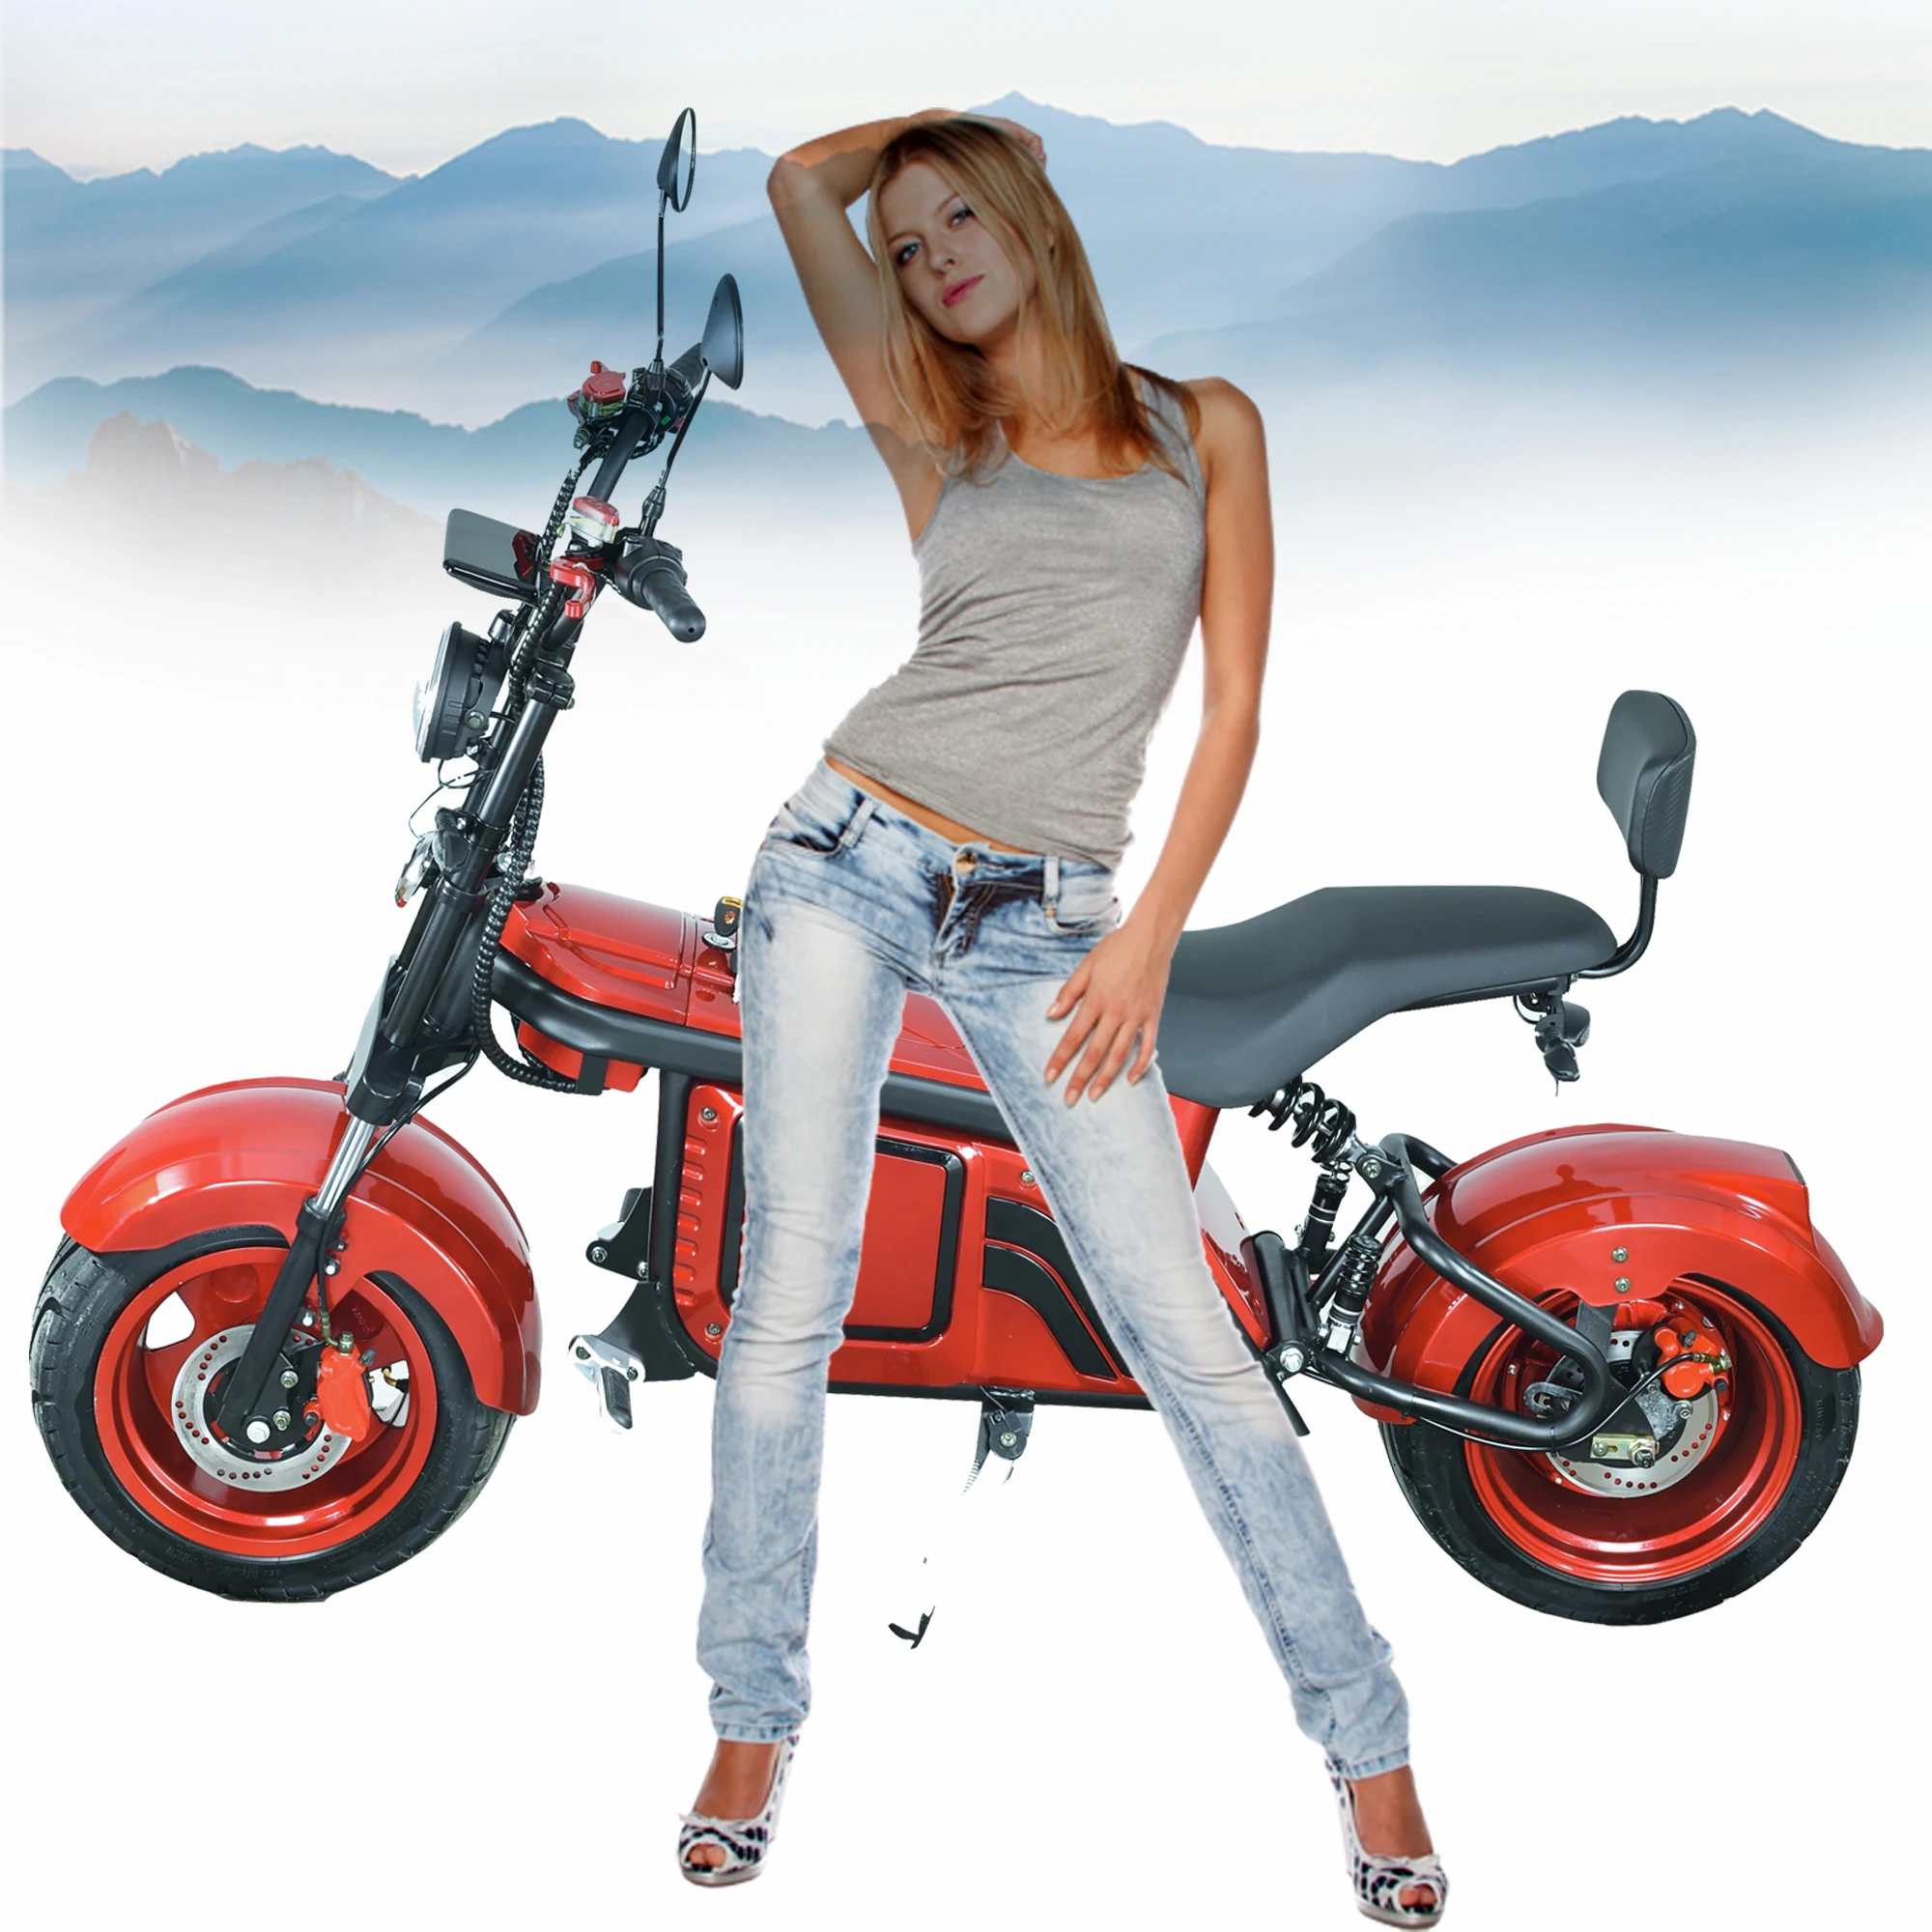 

Off Road Model HULK Flexible 4000W Dual Motor Powerful Three Wheel Electric Scooter Electric Tricycle Citycoco